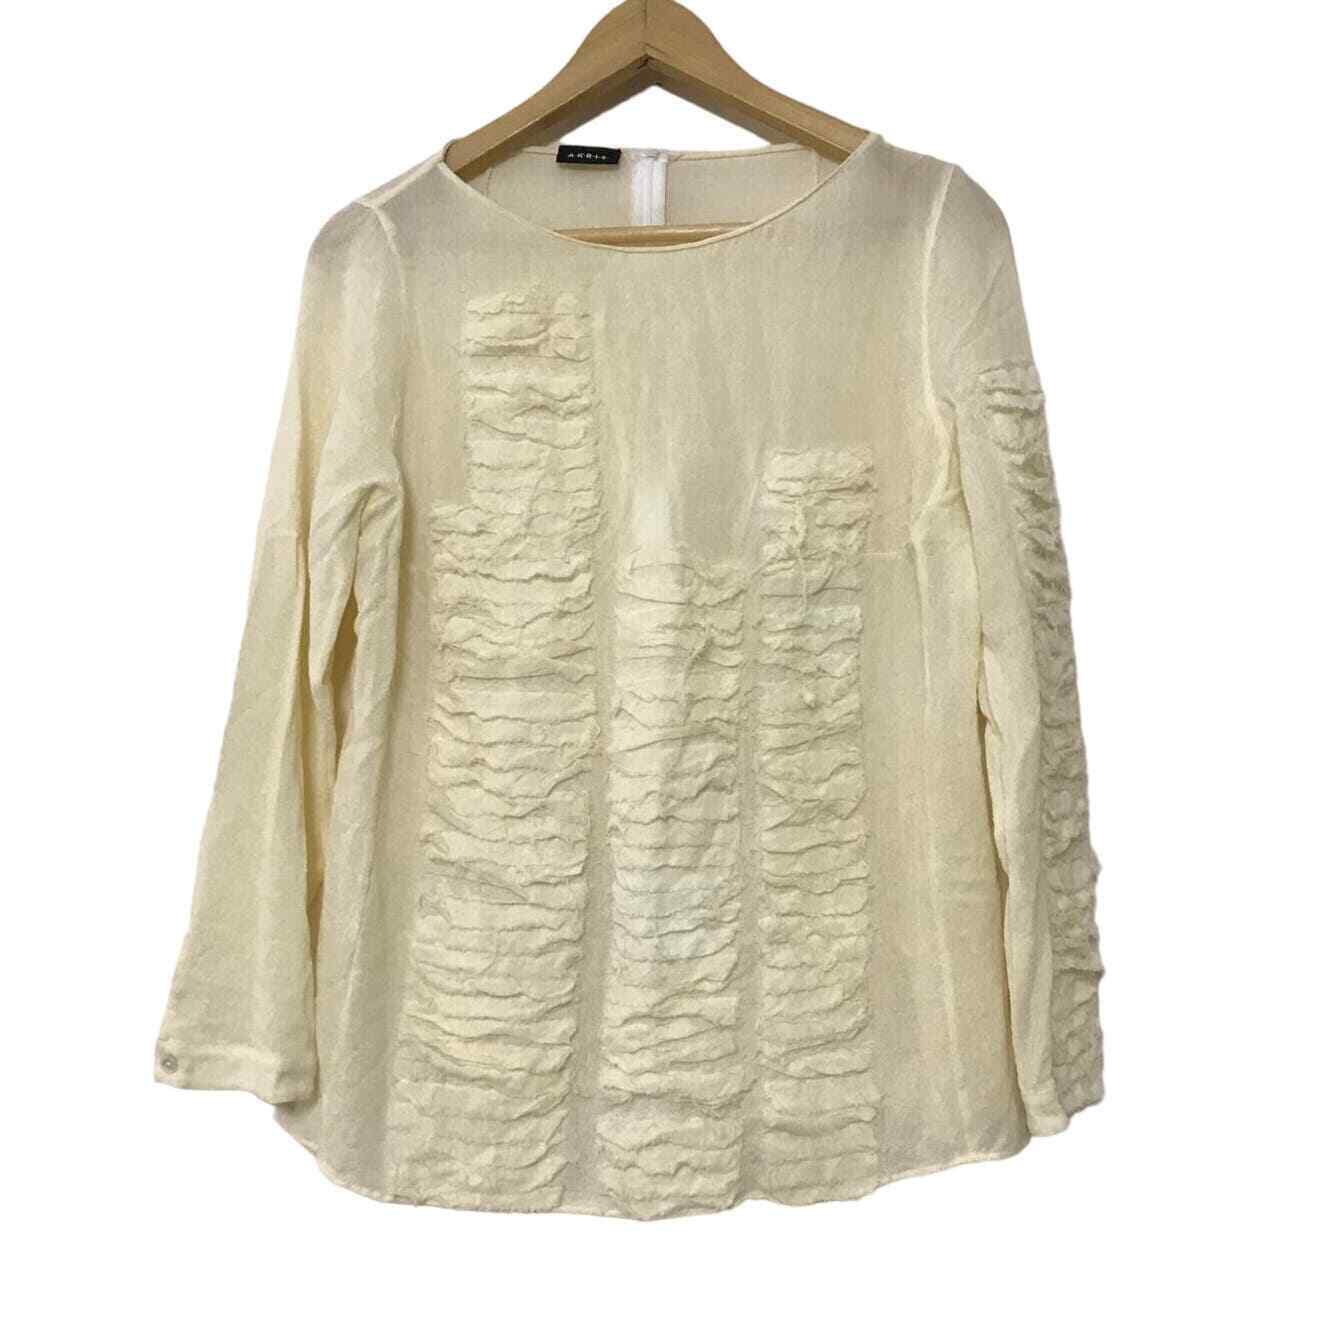 AKRIS unique light yellow tattered distress 100% wool long sleeve blouse top 14